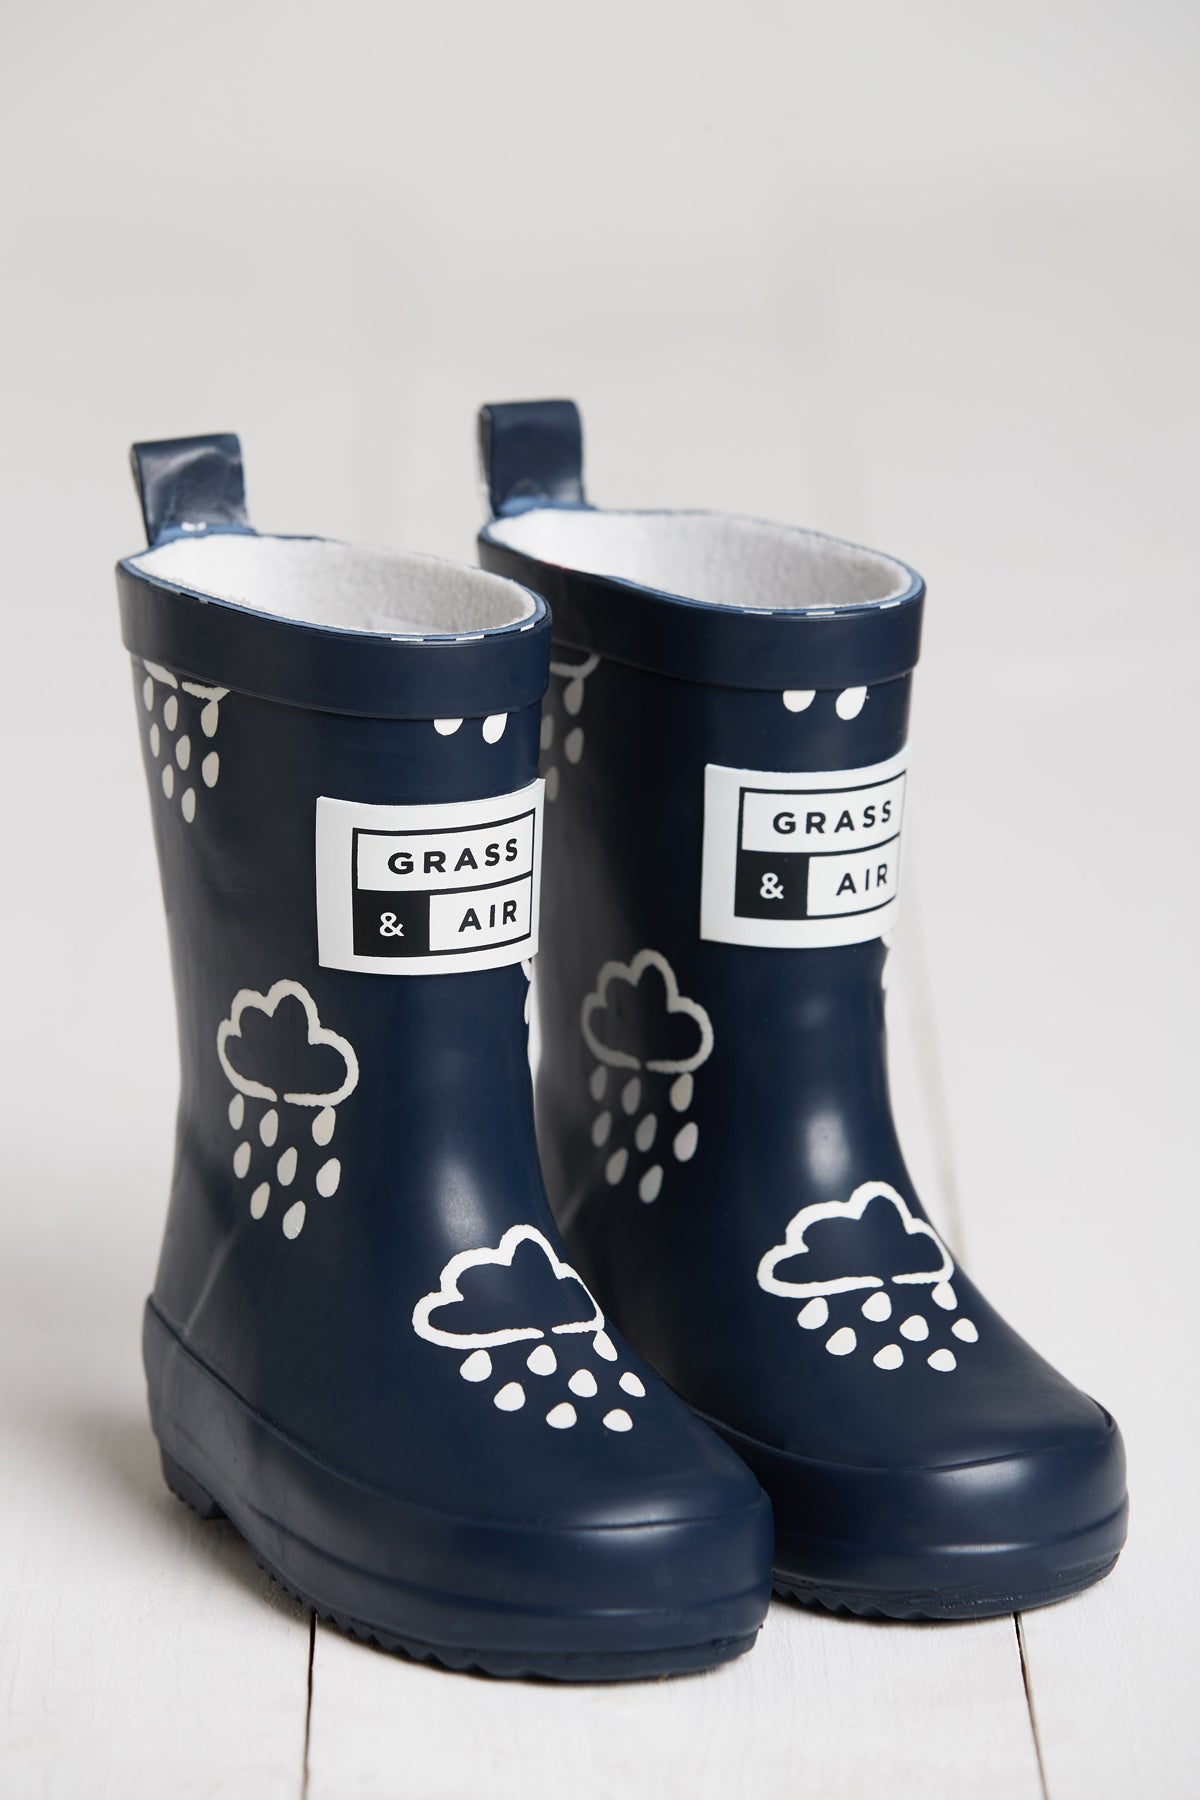 Grass & Air Navy Colour Changing Wellies